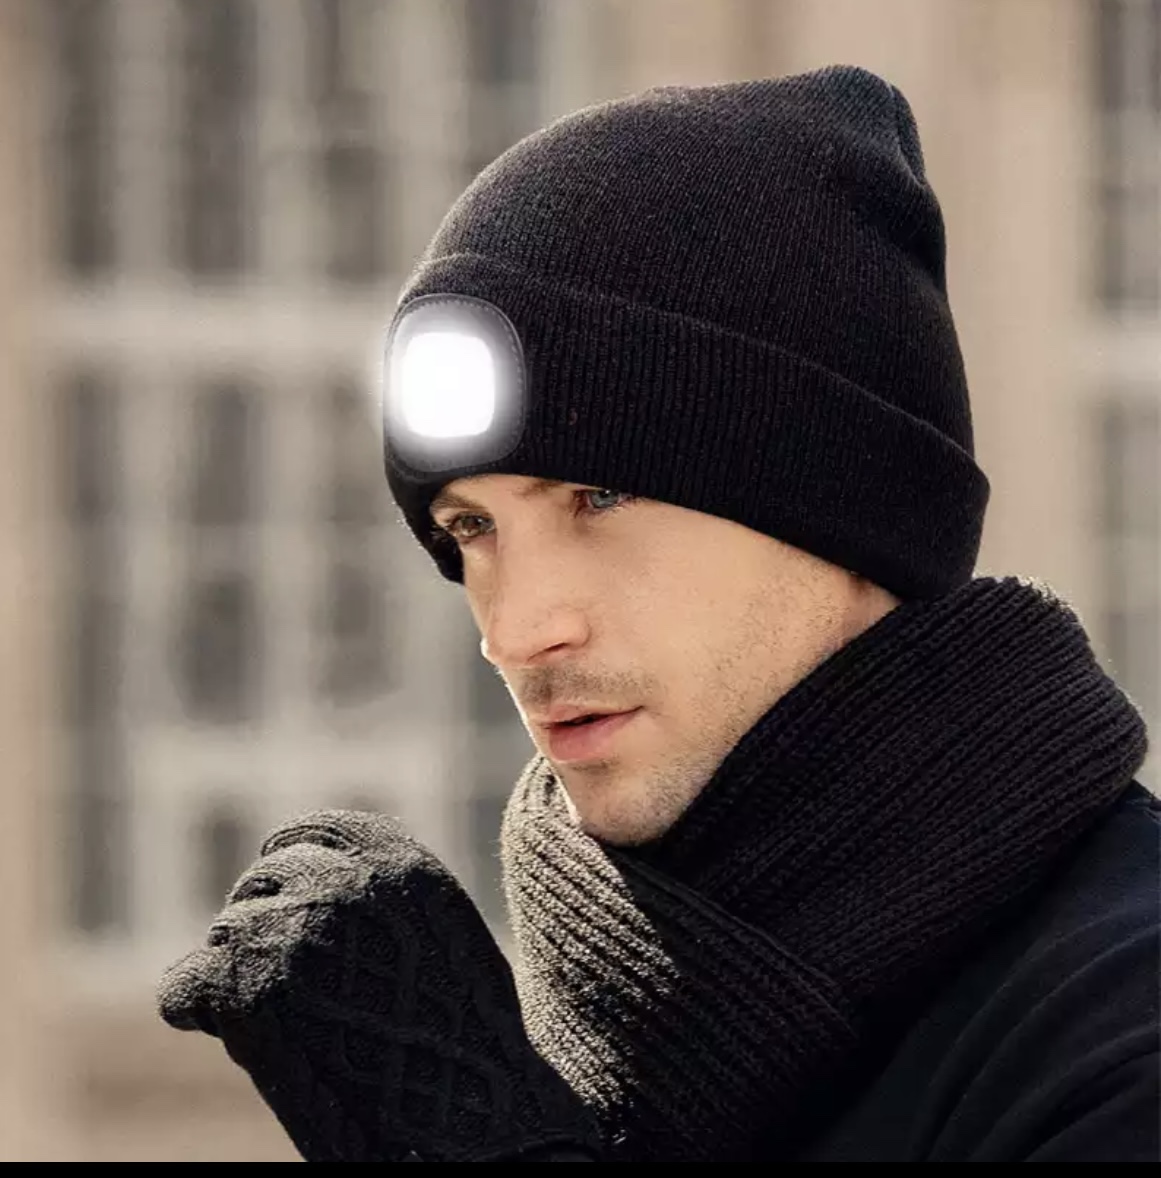 LED Lighted Beanie Cap Hip Hop Men/ Women Knit Hat Winter Warm Hunting Camping Running Hat Gifts for Men Women Outdoor Fishing Caps